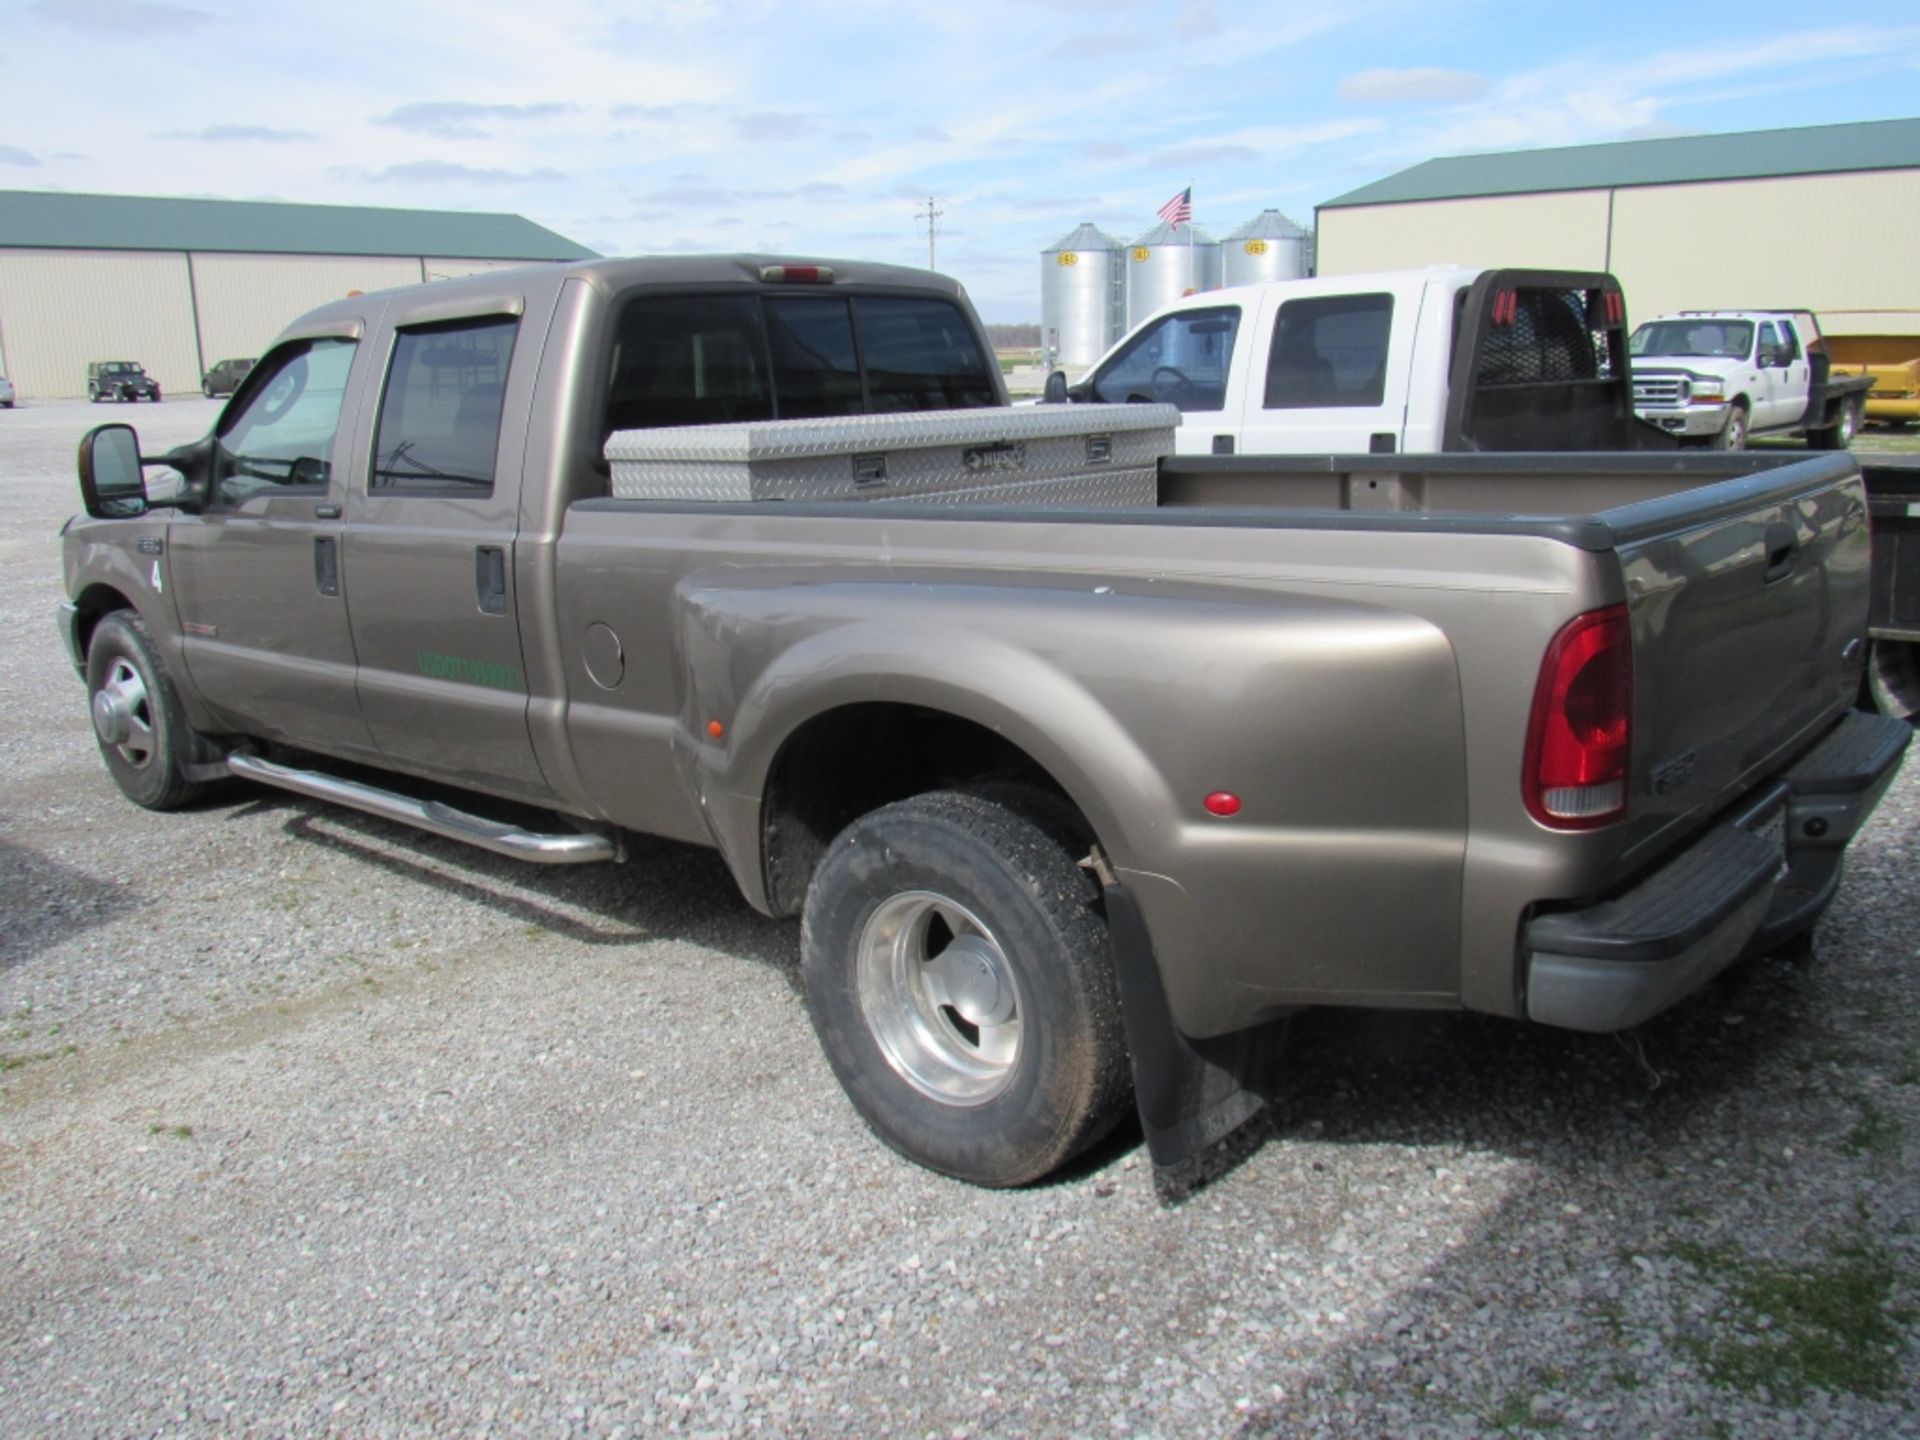 2004 Ford F-350 XLT 2wd 6.0L Powerstroke Diesel Engine - Image 22 of 22